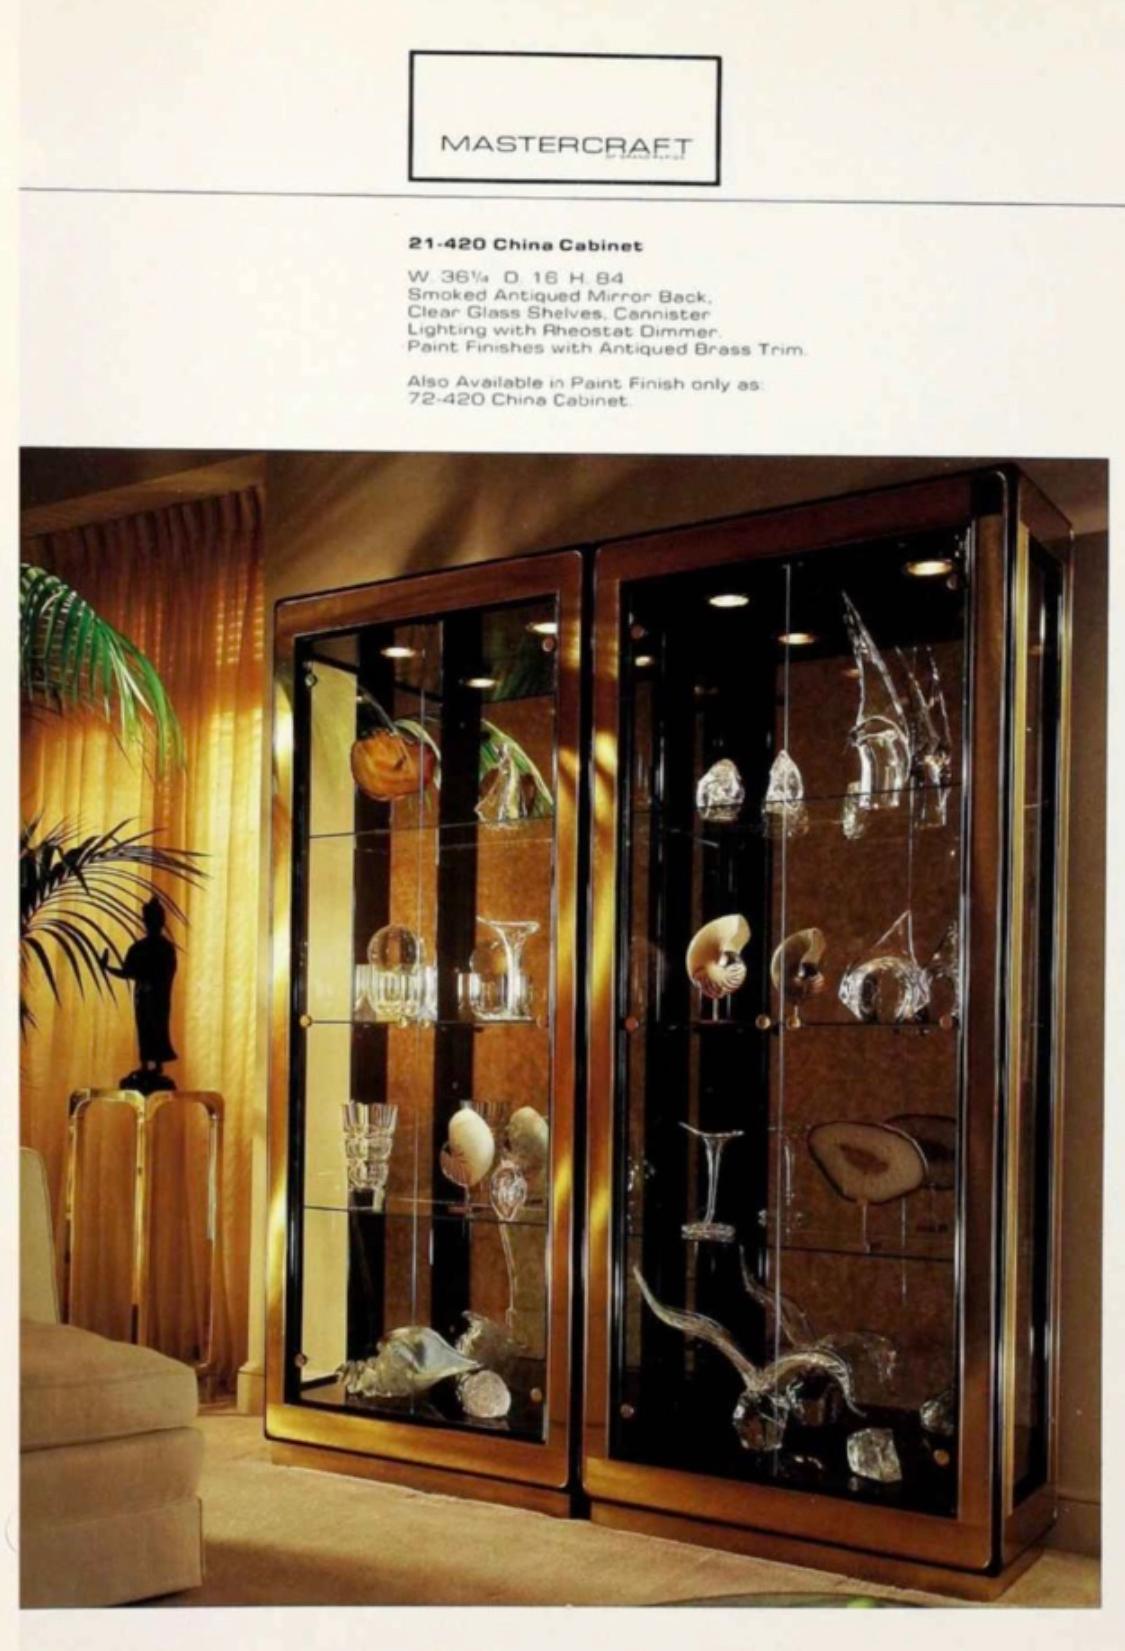 Mastercraft model 21-420 china cabinet vitrine. Clad in antiqued brass with black lacquer trim. Backwall is smoked antiqued mirror.  Three tempered clear glass shelves with plate grooves.  Illuminated by two cannister lights in ceiling controlled by